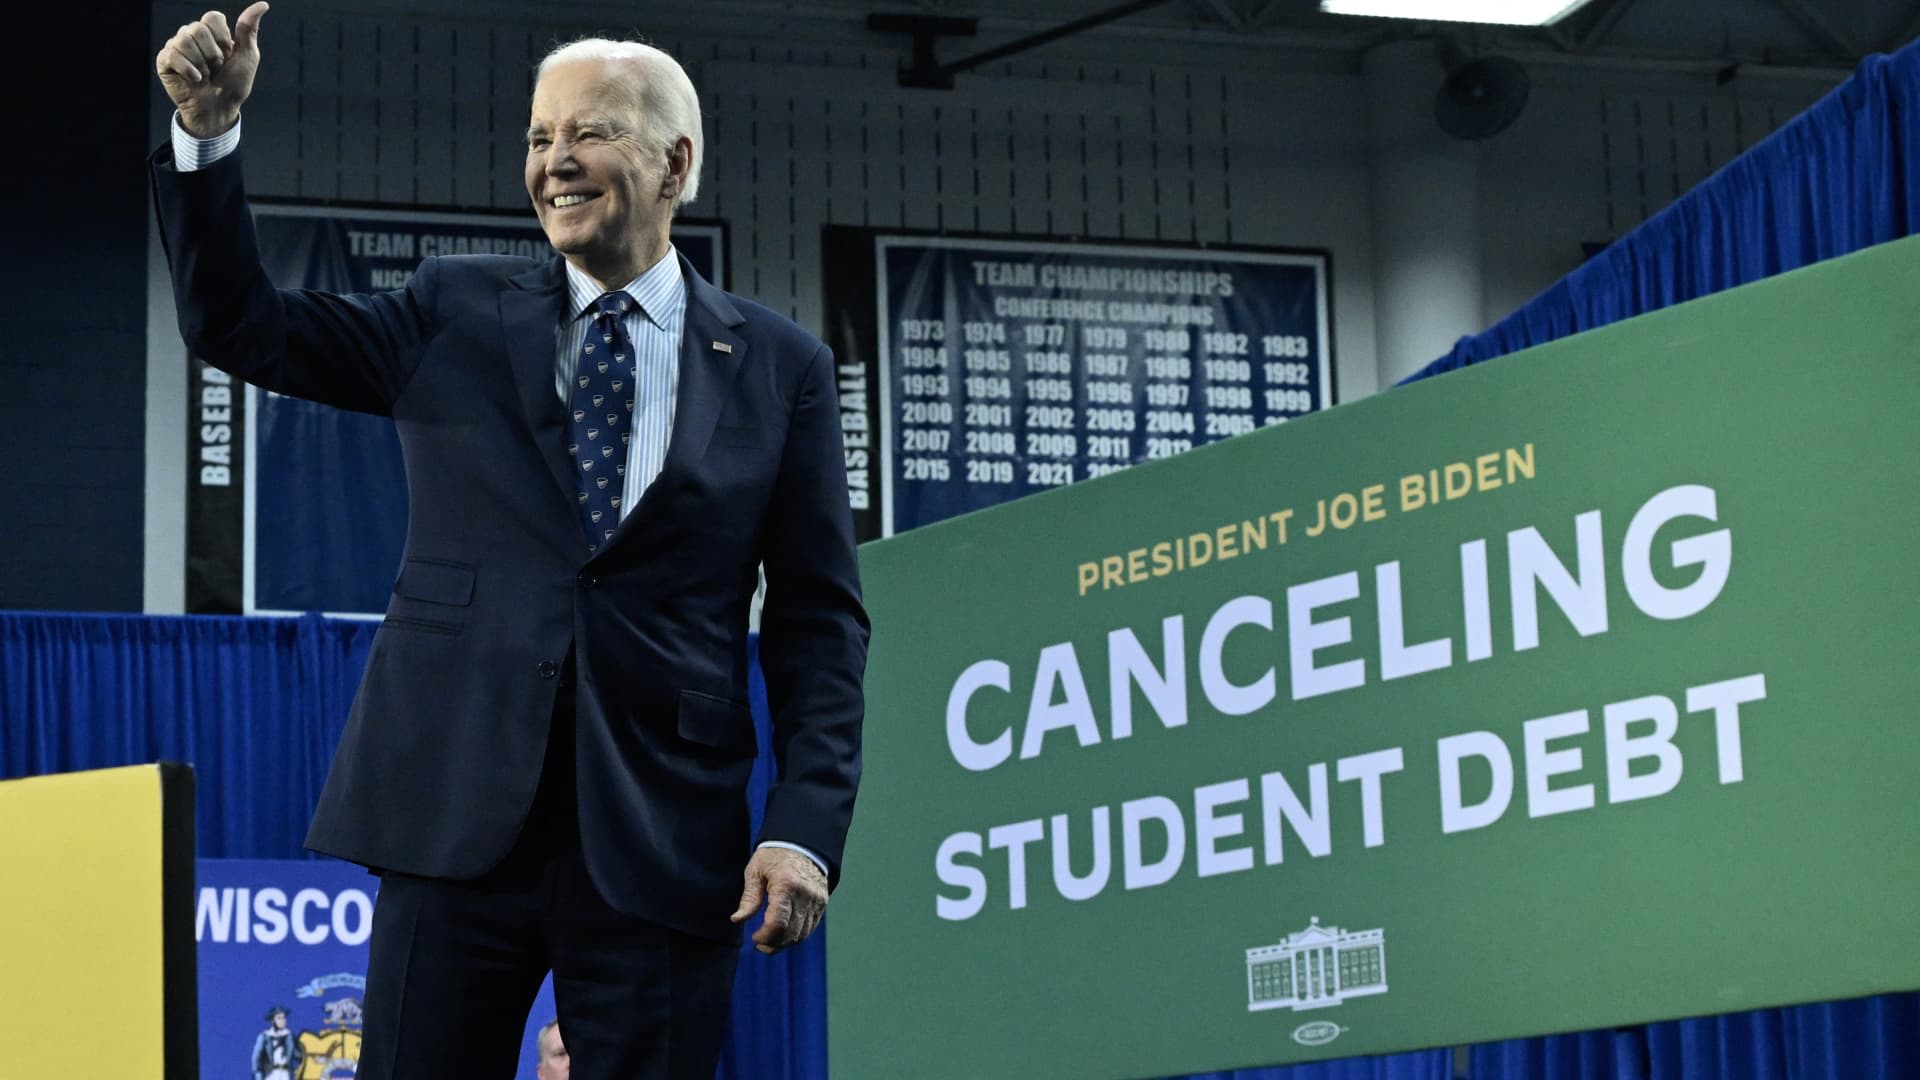 Biden student loan repayment plan to resume amid legal challenges, federal appeals court rules